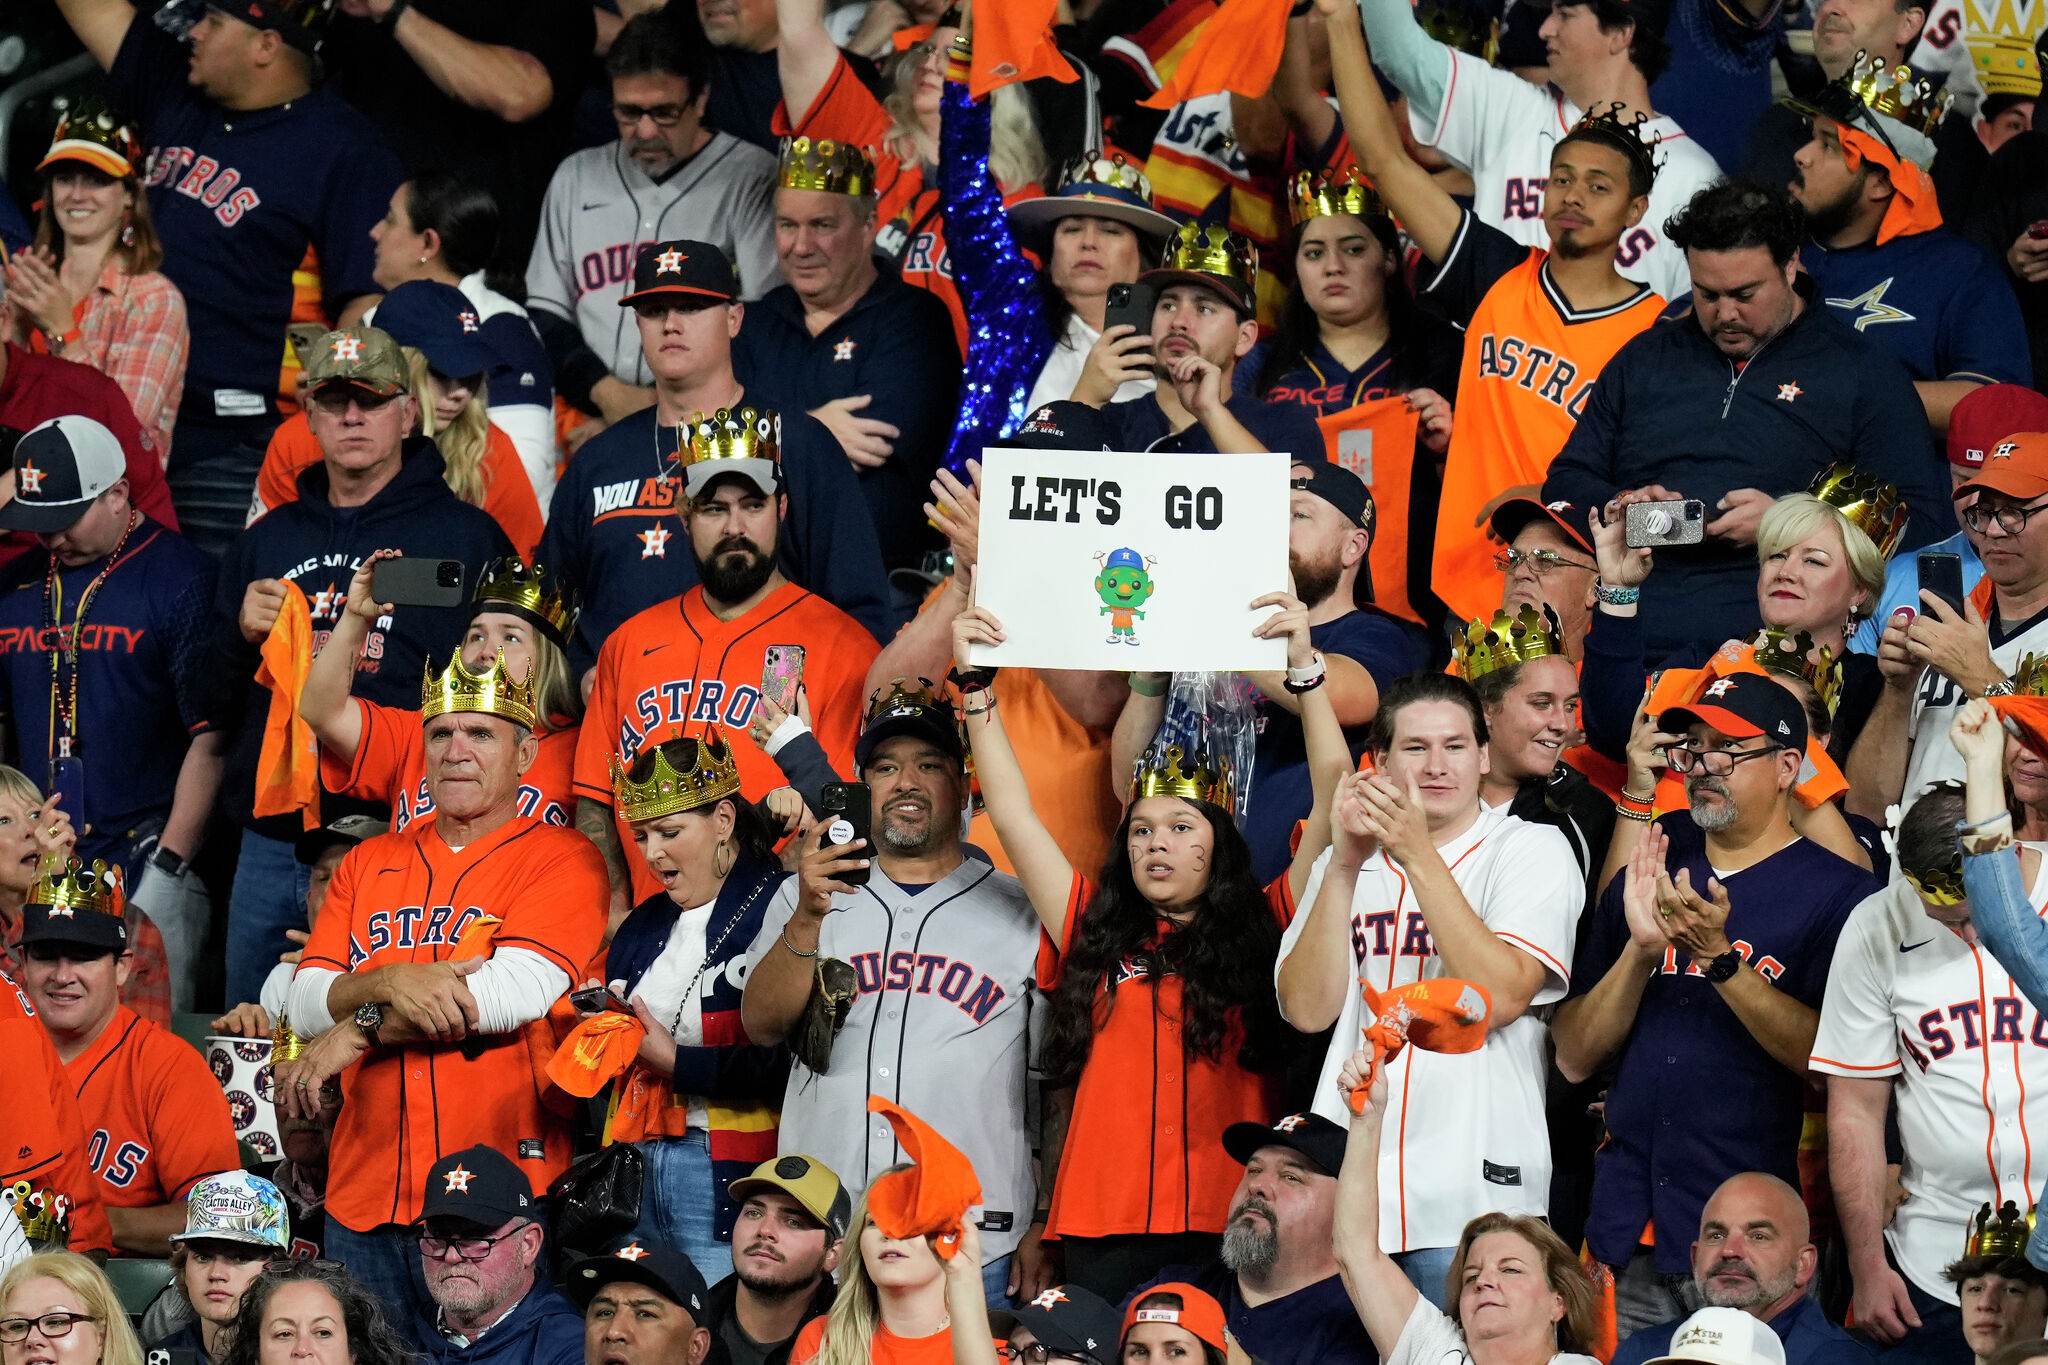 I started to question myself': Astros fan receives World Series